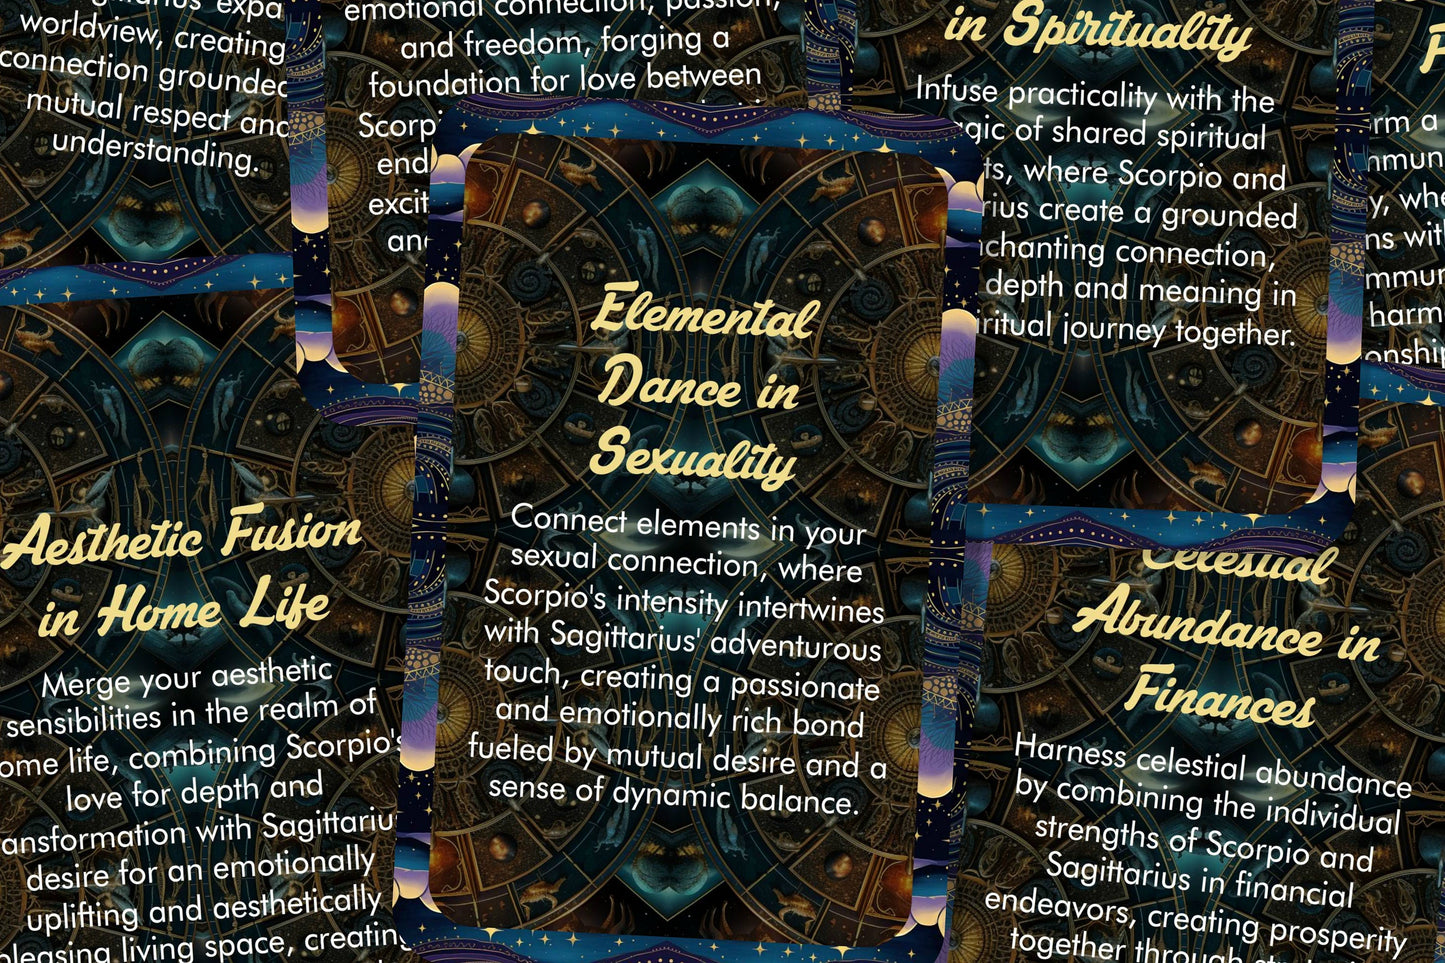 Scorpio and Sagittarius - Zodiac Compatibility - Divination tools - Oracle cards - Star Sign Compatibility - Horoscope Compatibility Cards